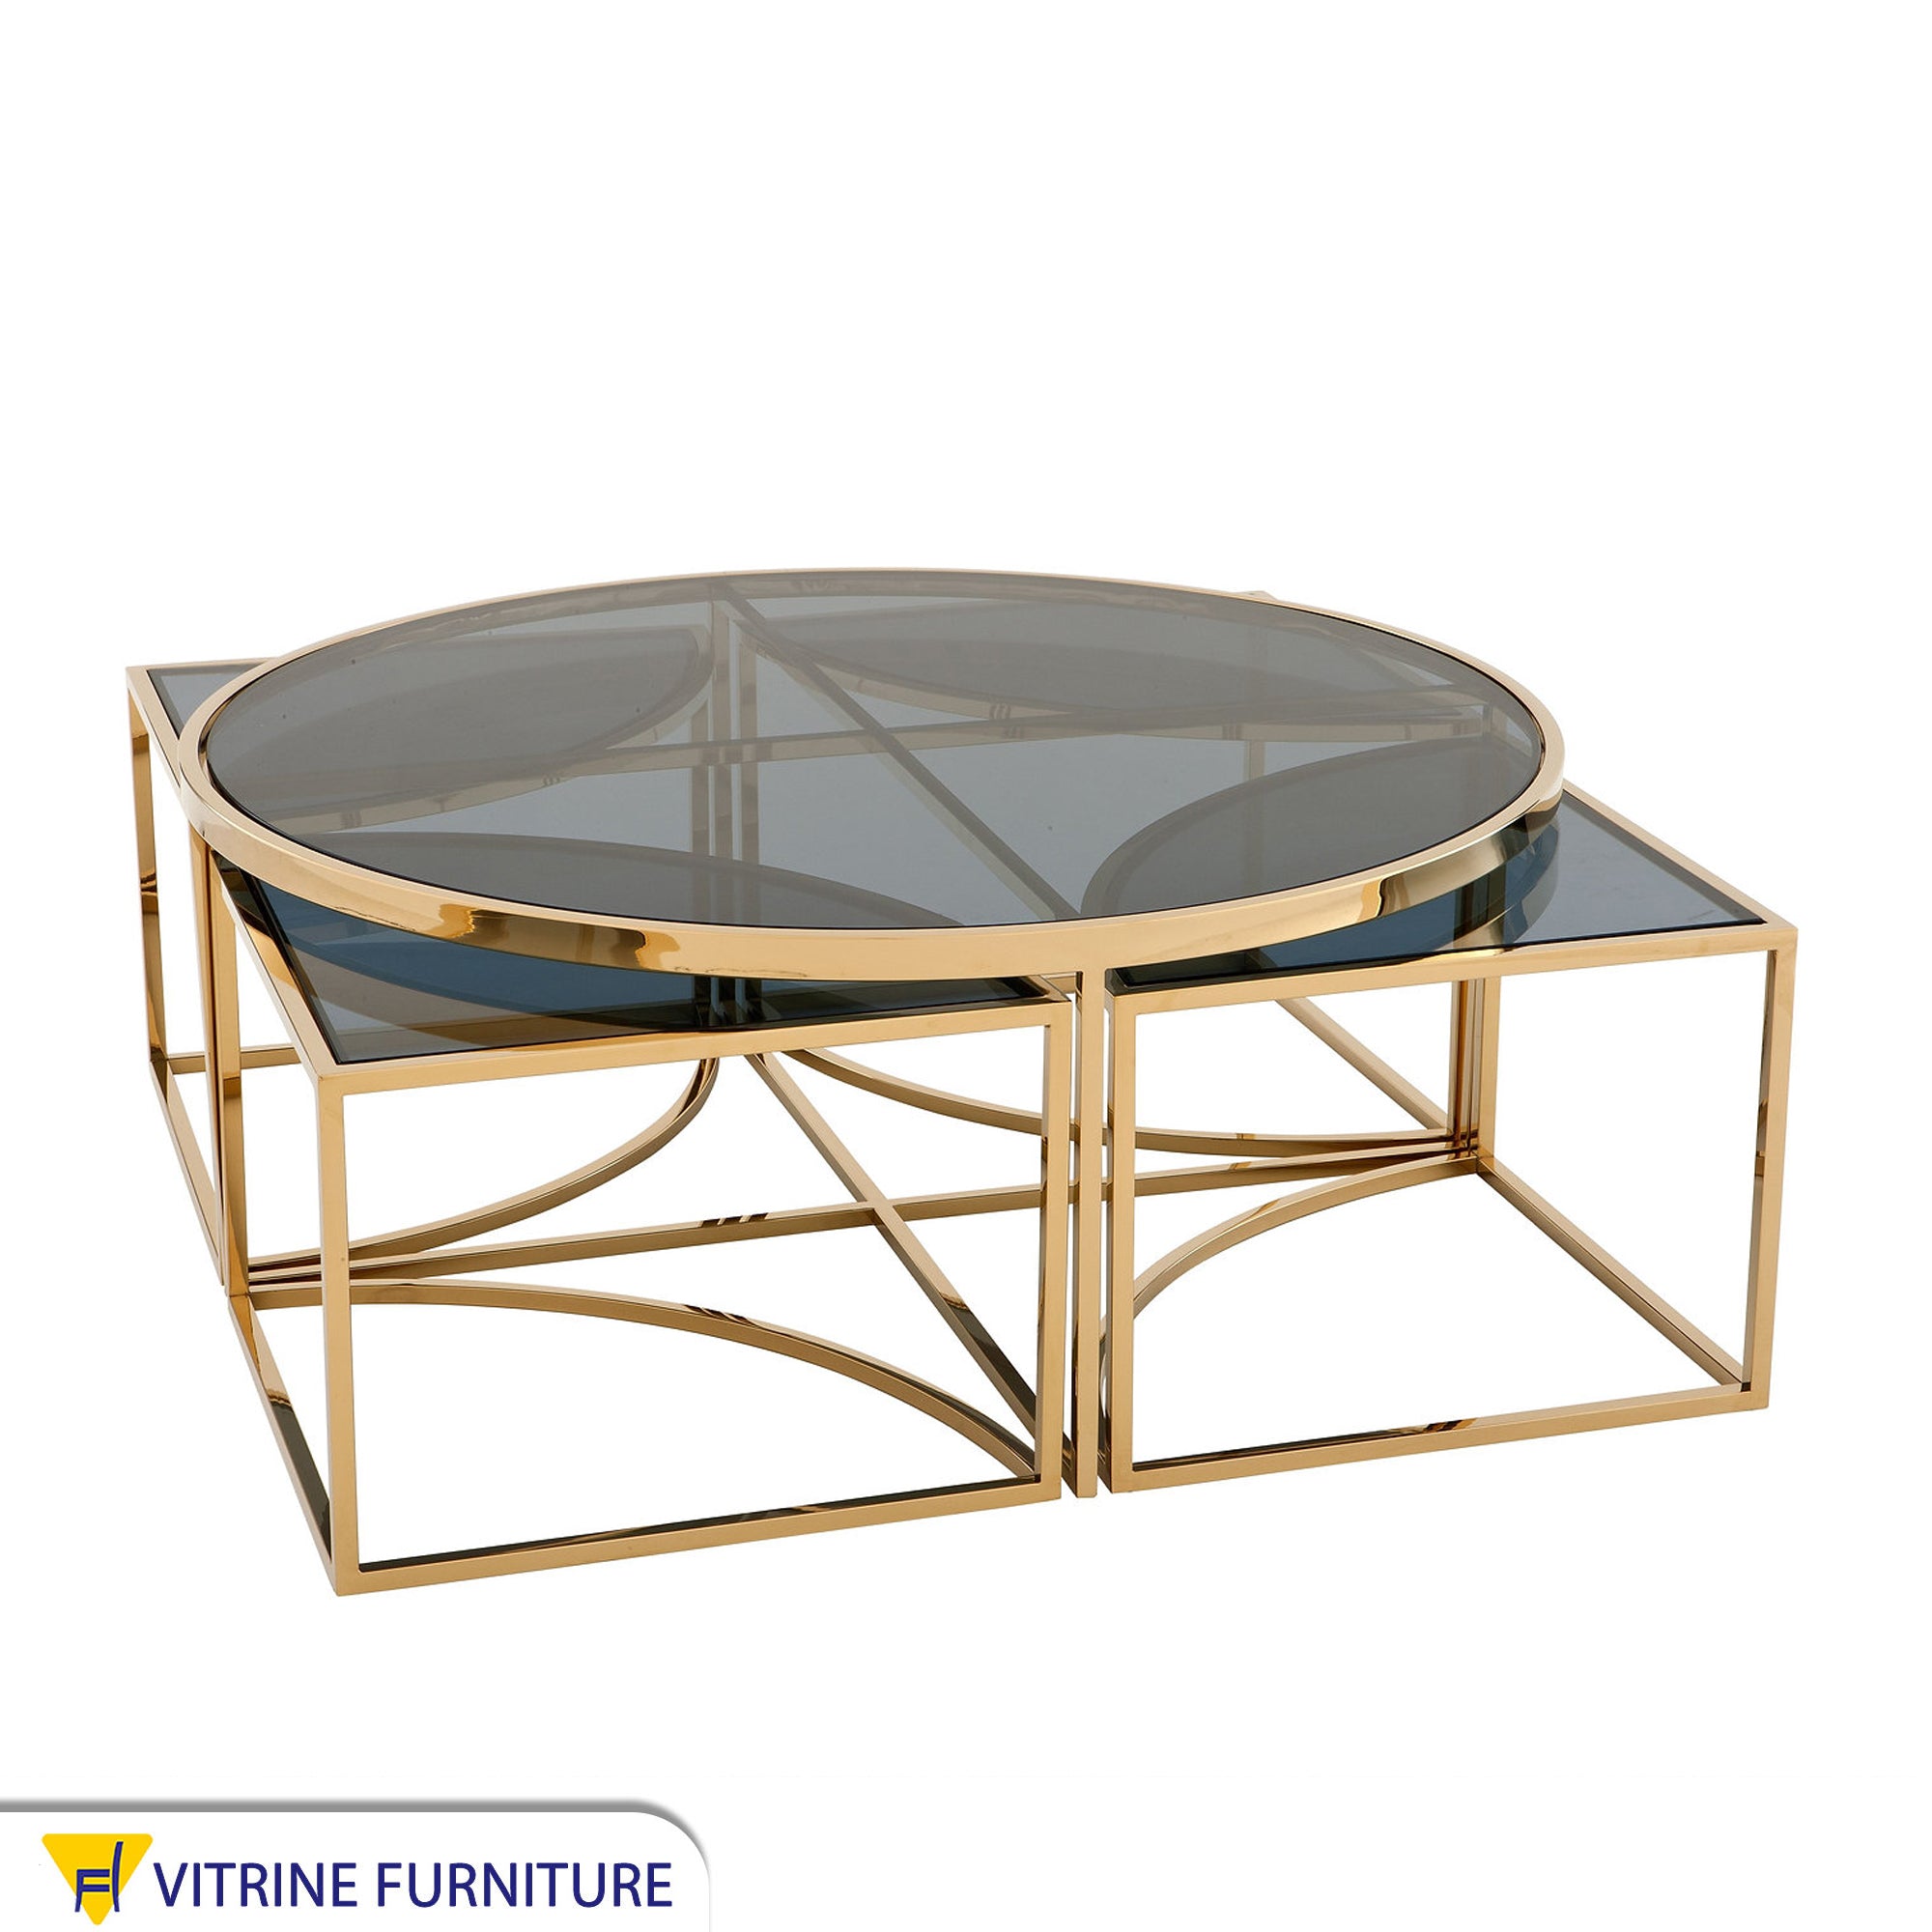 A set of tables with a modern design in golden color